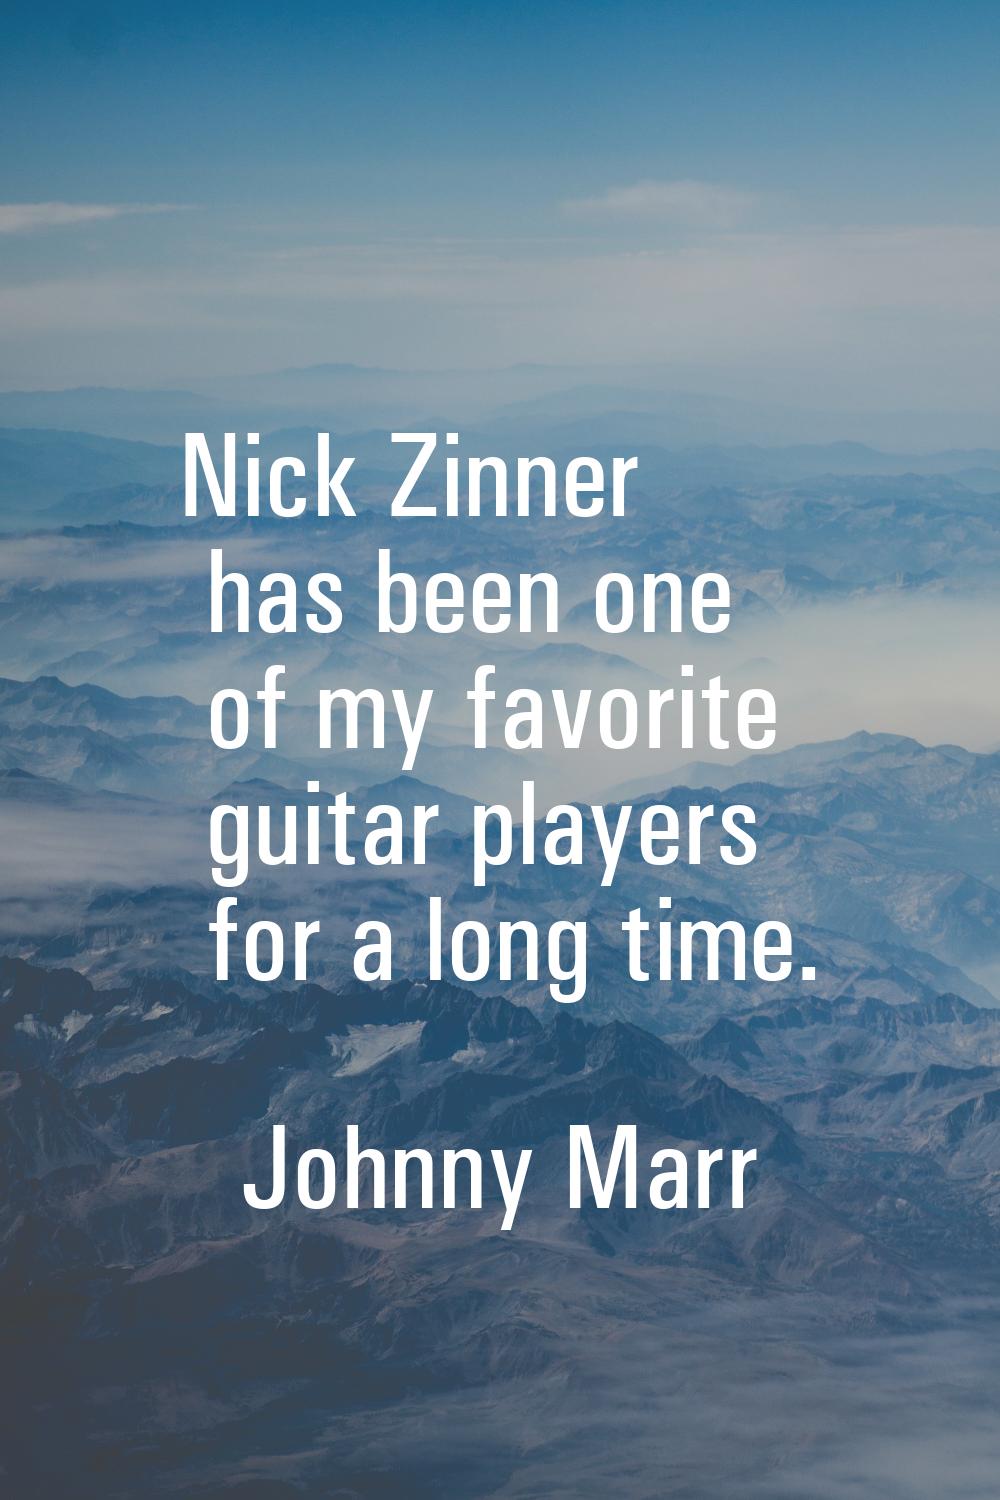 Nick Zinner has been one of my favorite guitar players for a long time.